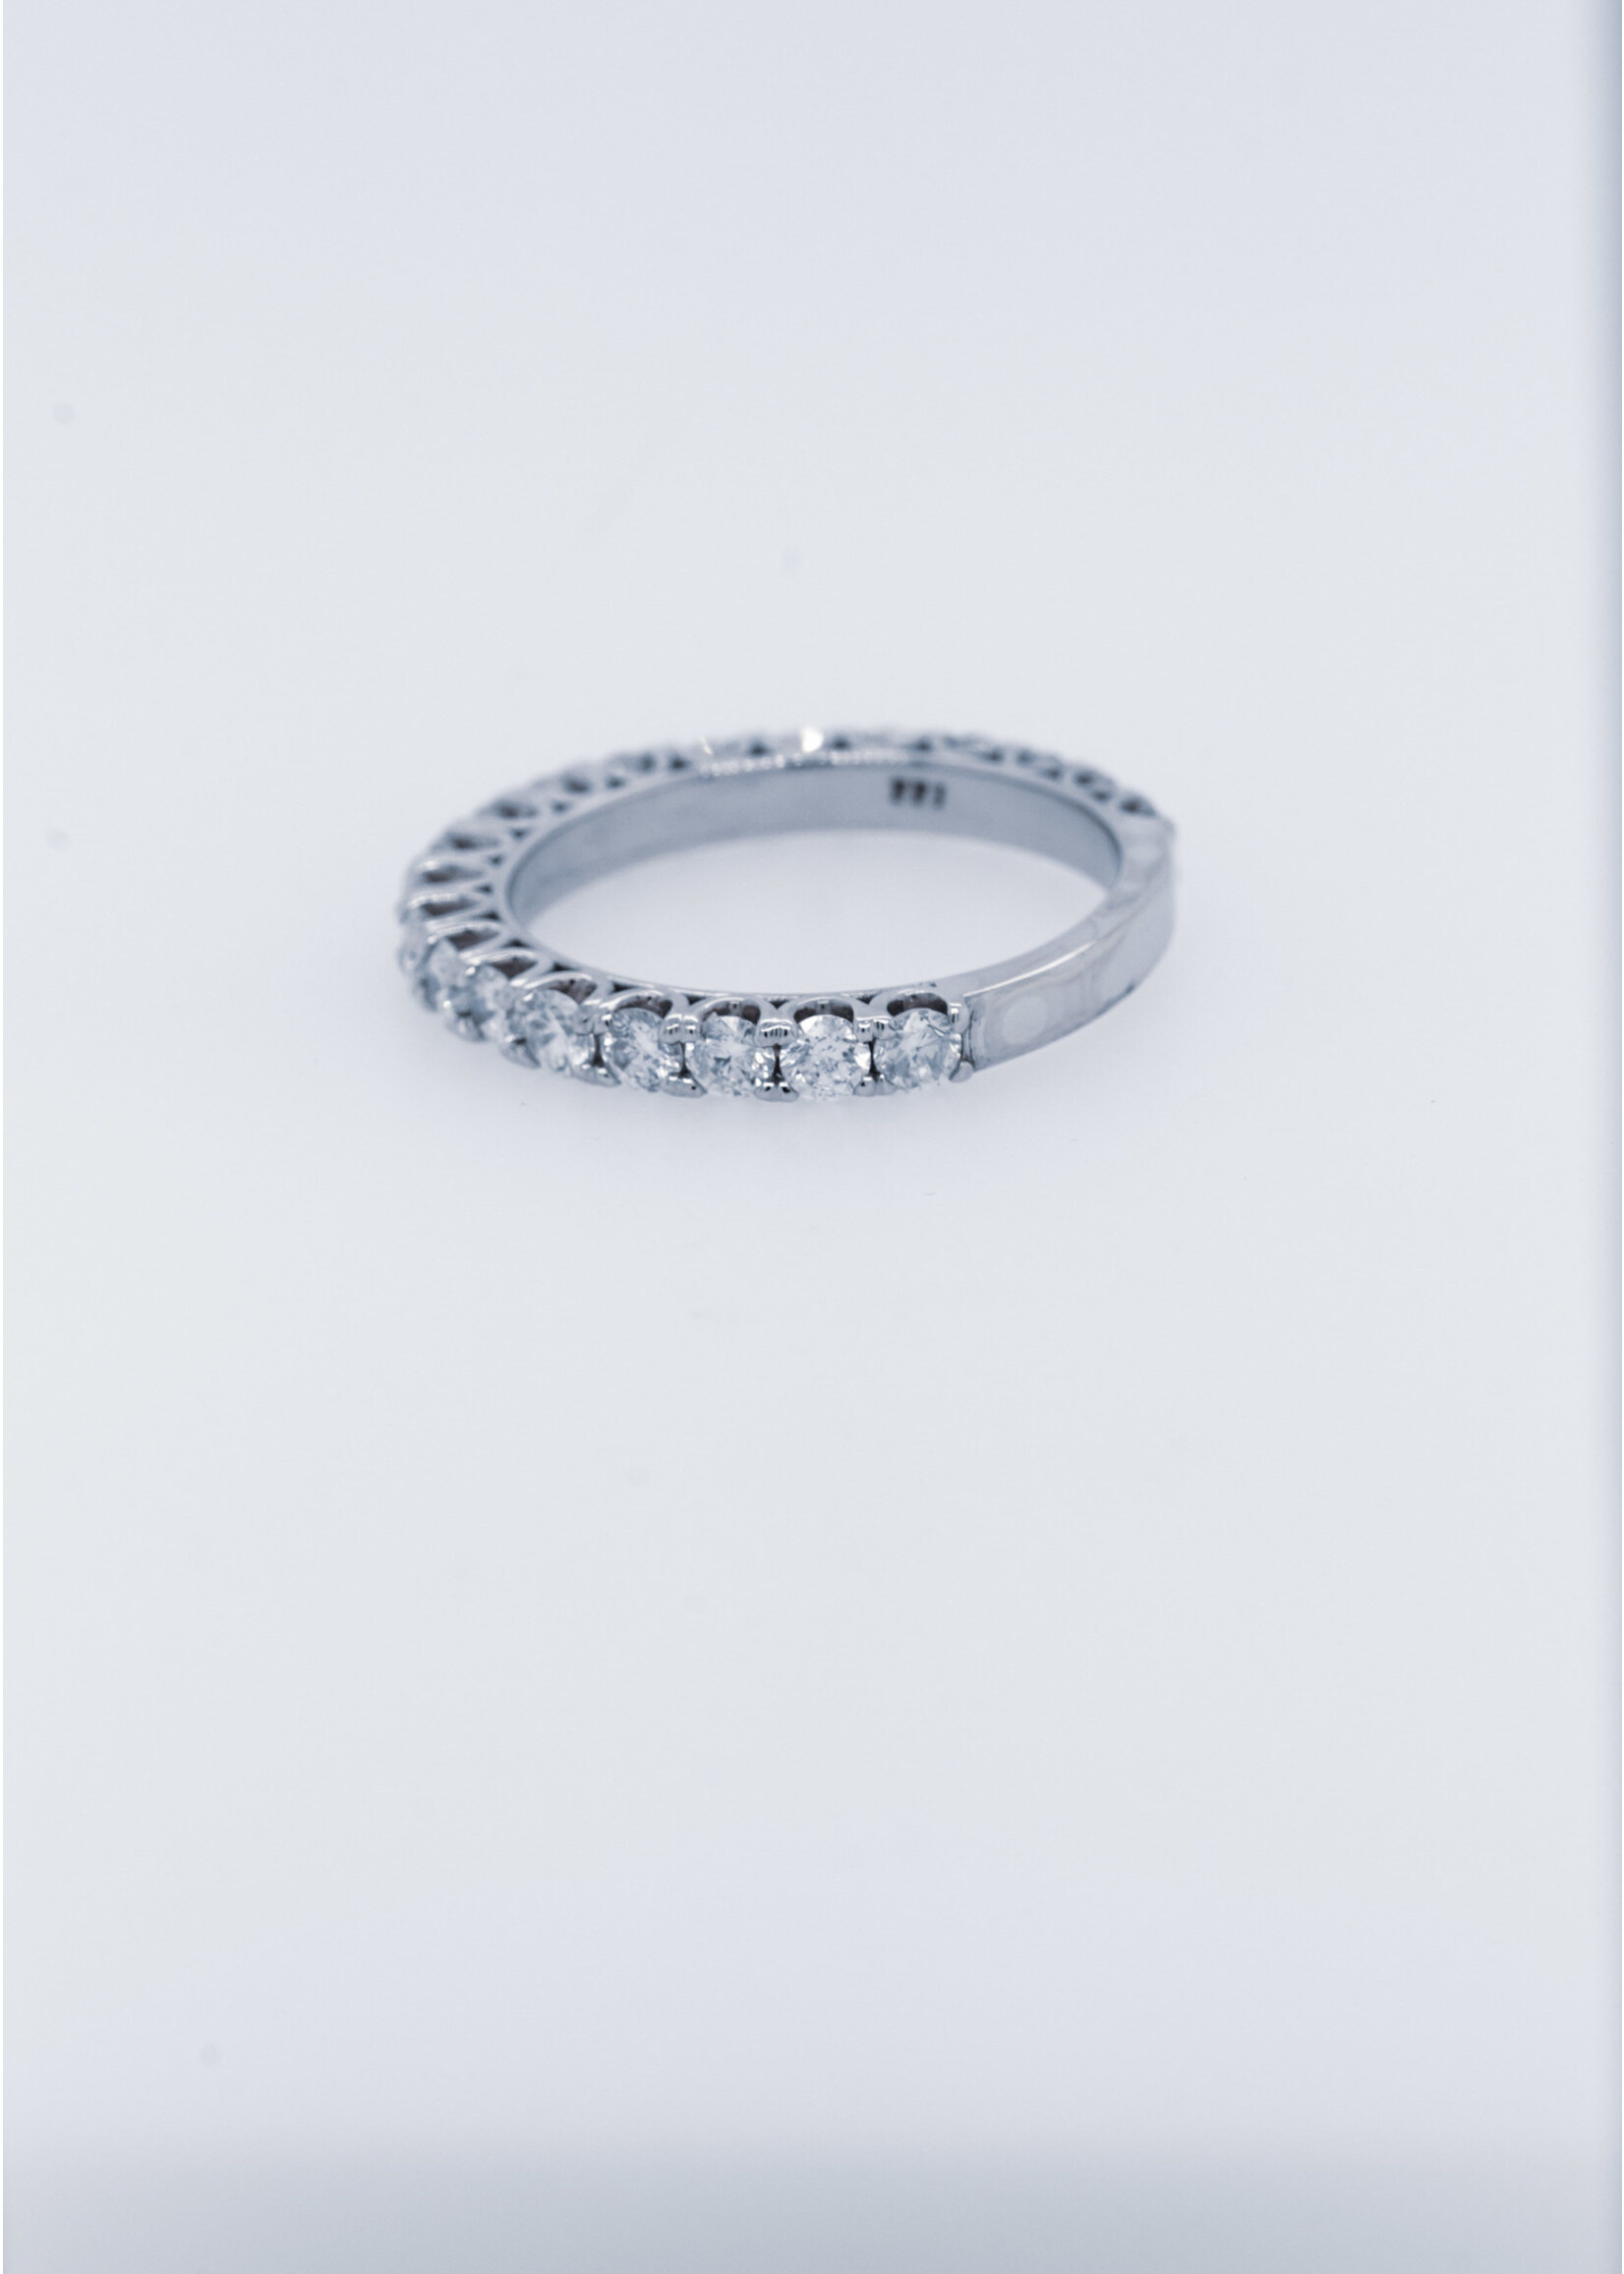 14KW 2.78g 1.00ctw Round Diamond Stackable Band (size 6)